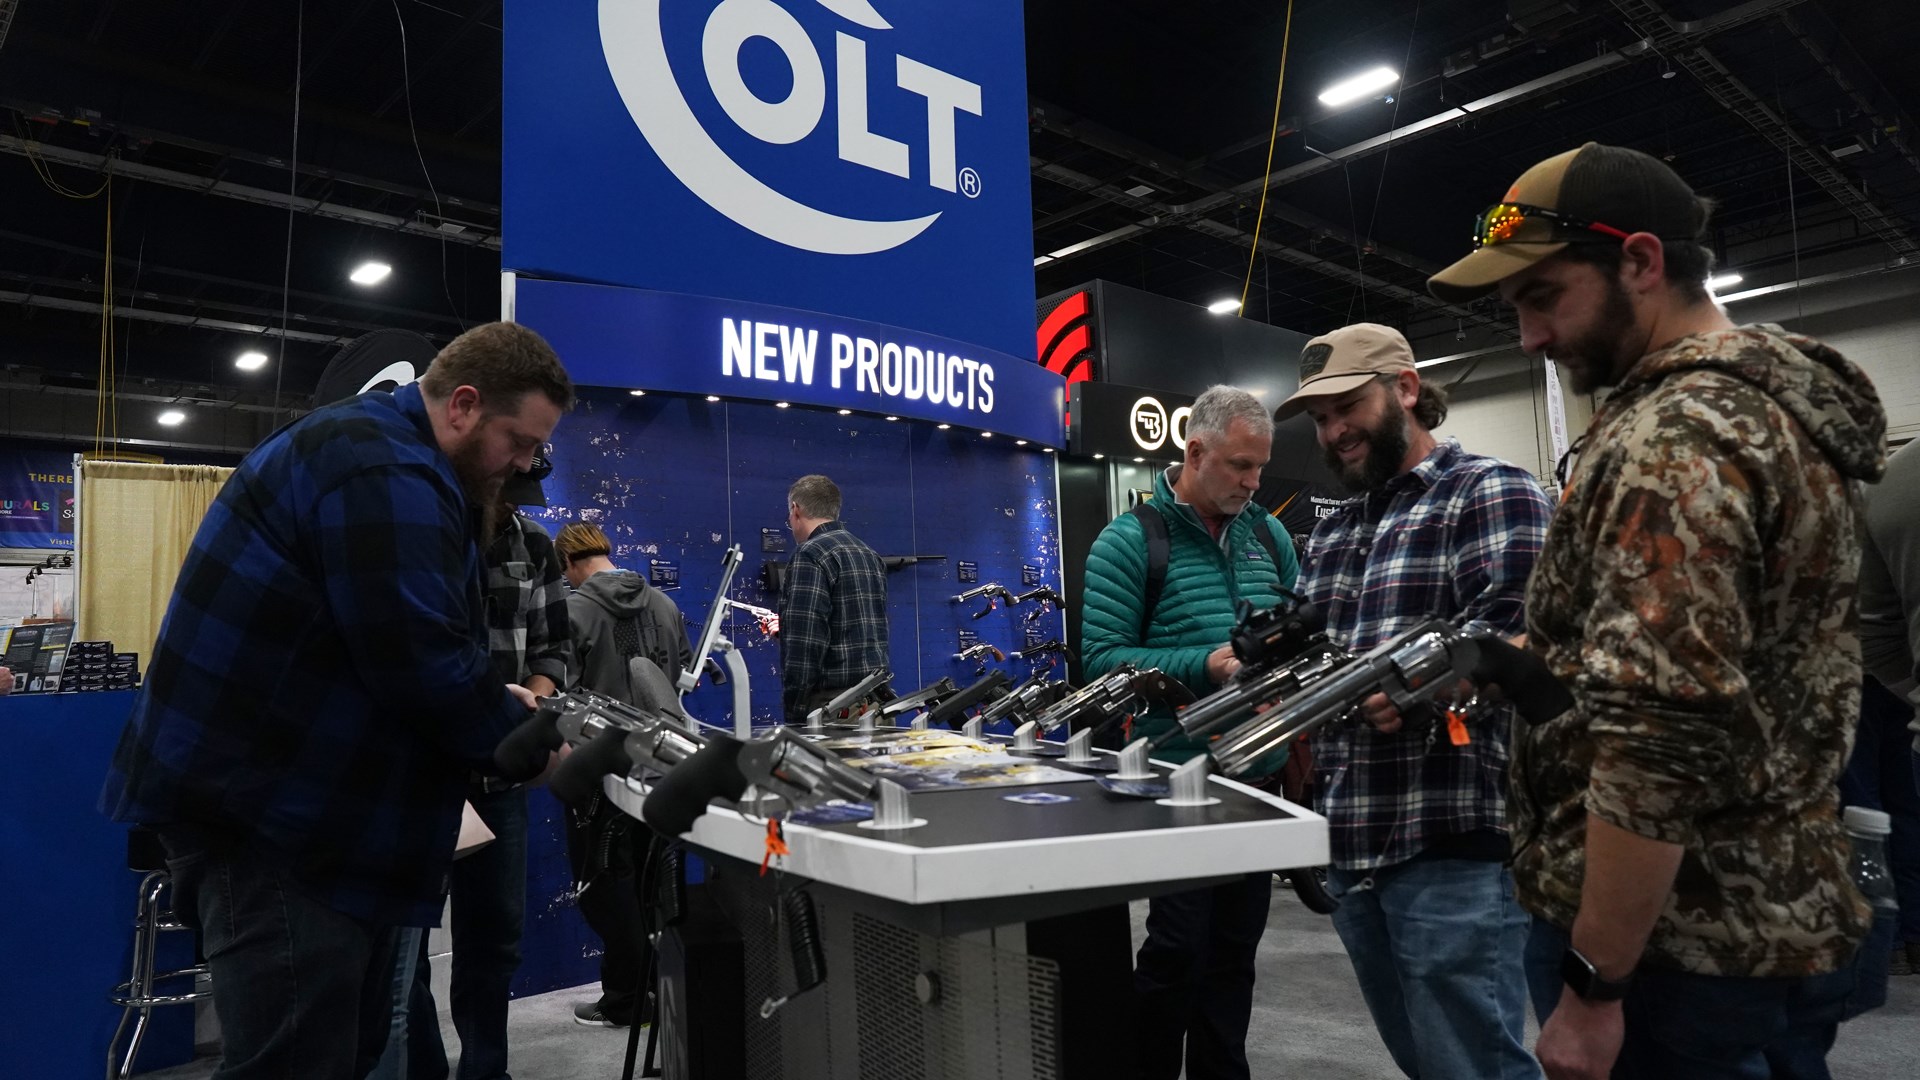 people gathered at COLT Firearms new products booth at great american outdoor show